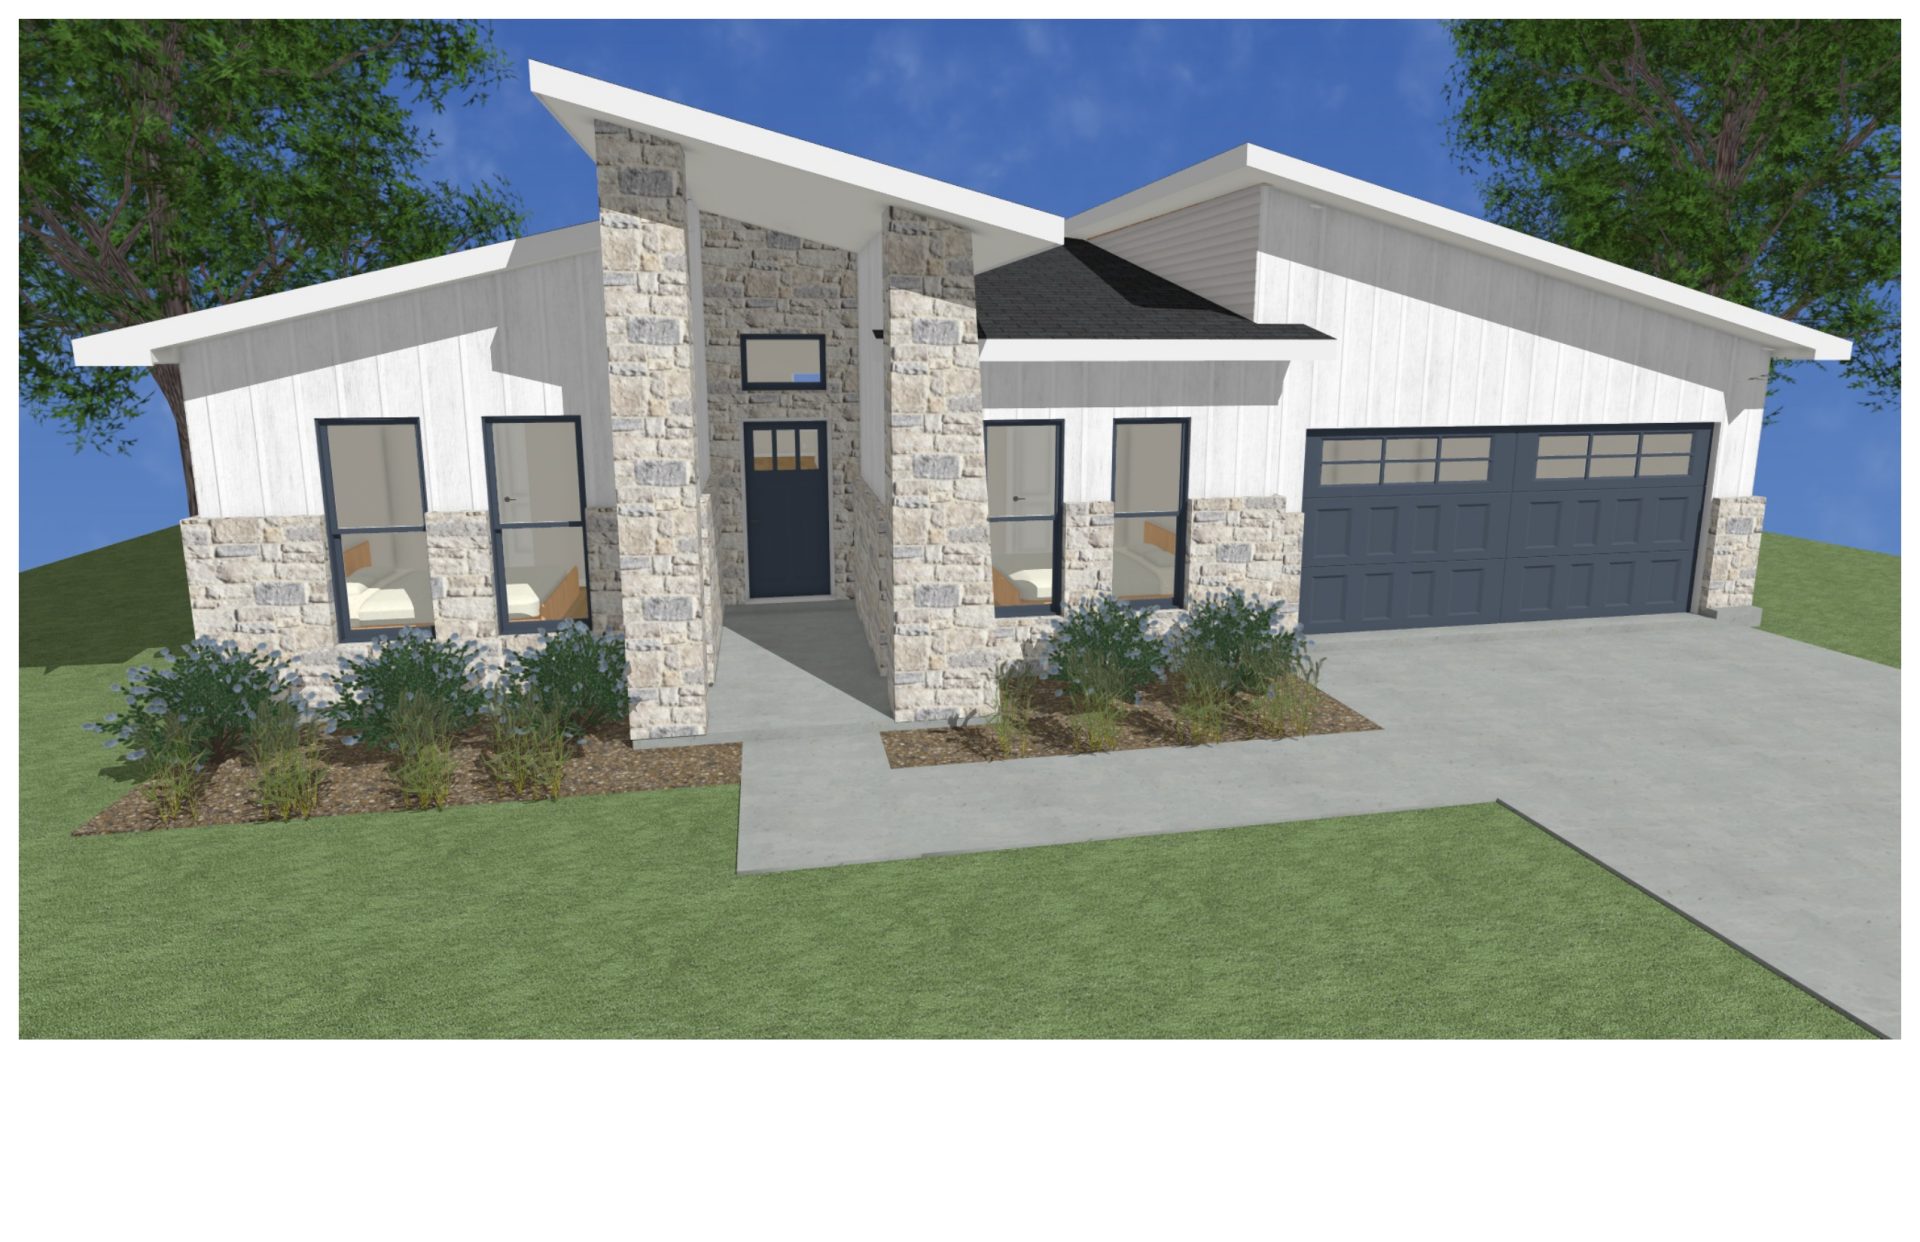 A 3d rendering of a home with a garage.